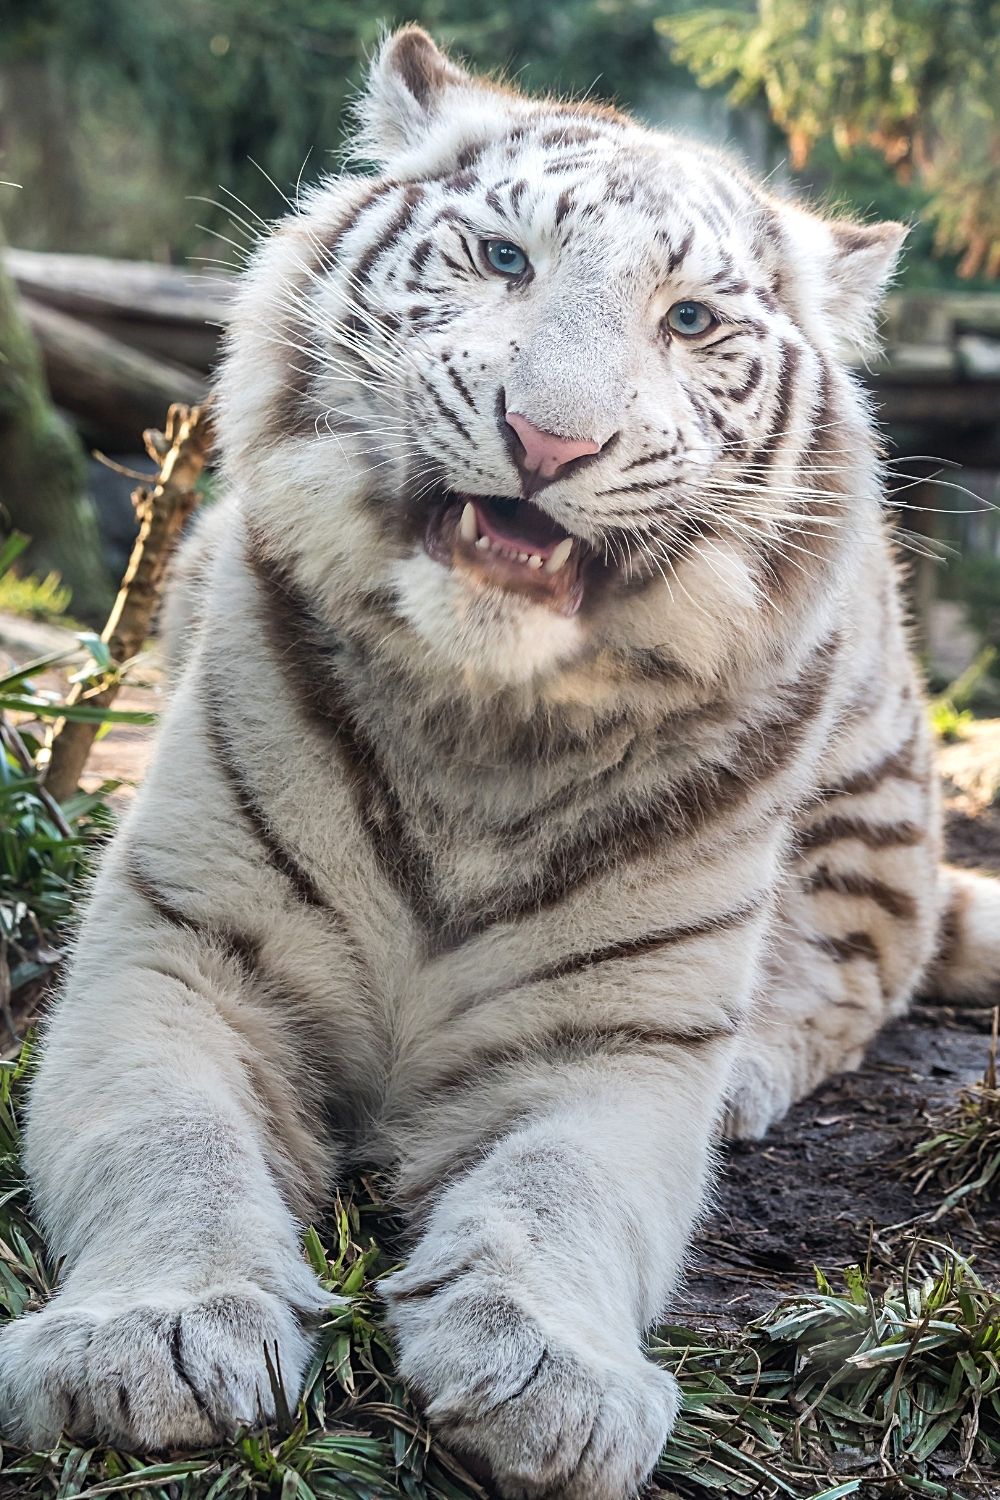 There was one white tiger who was previously thought to have facial features similar to Down Syndrome